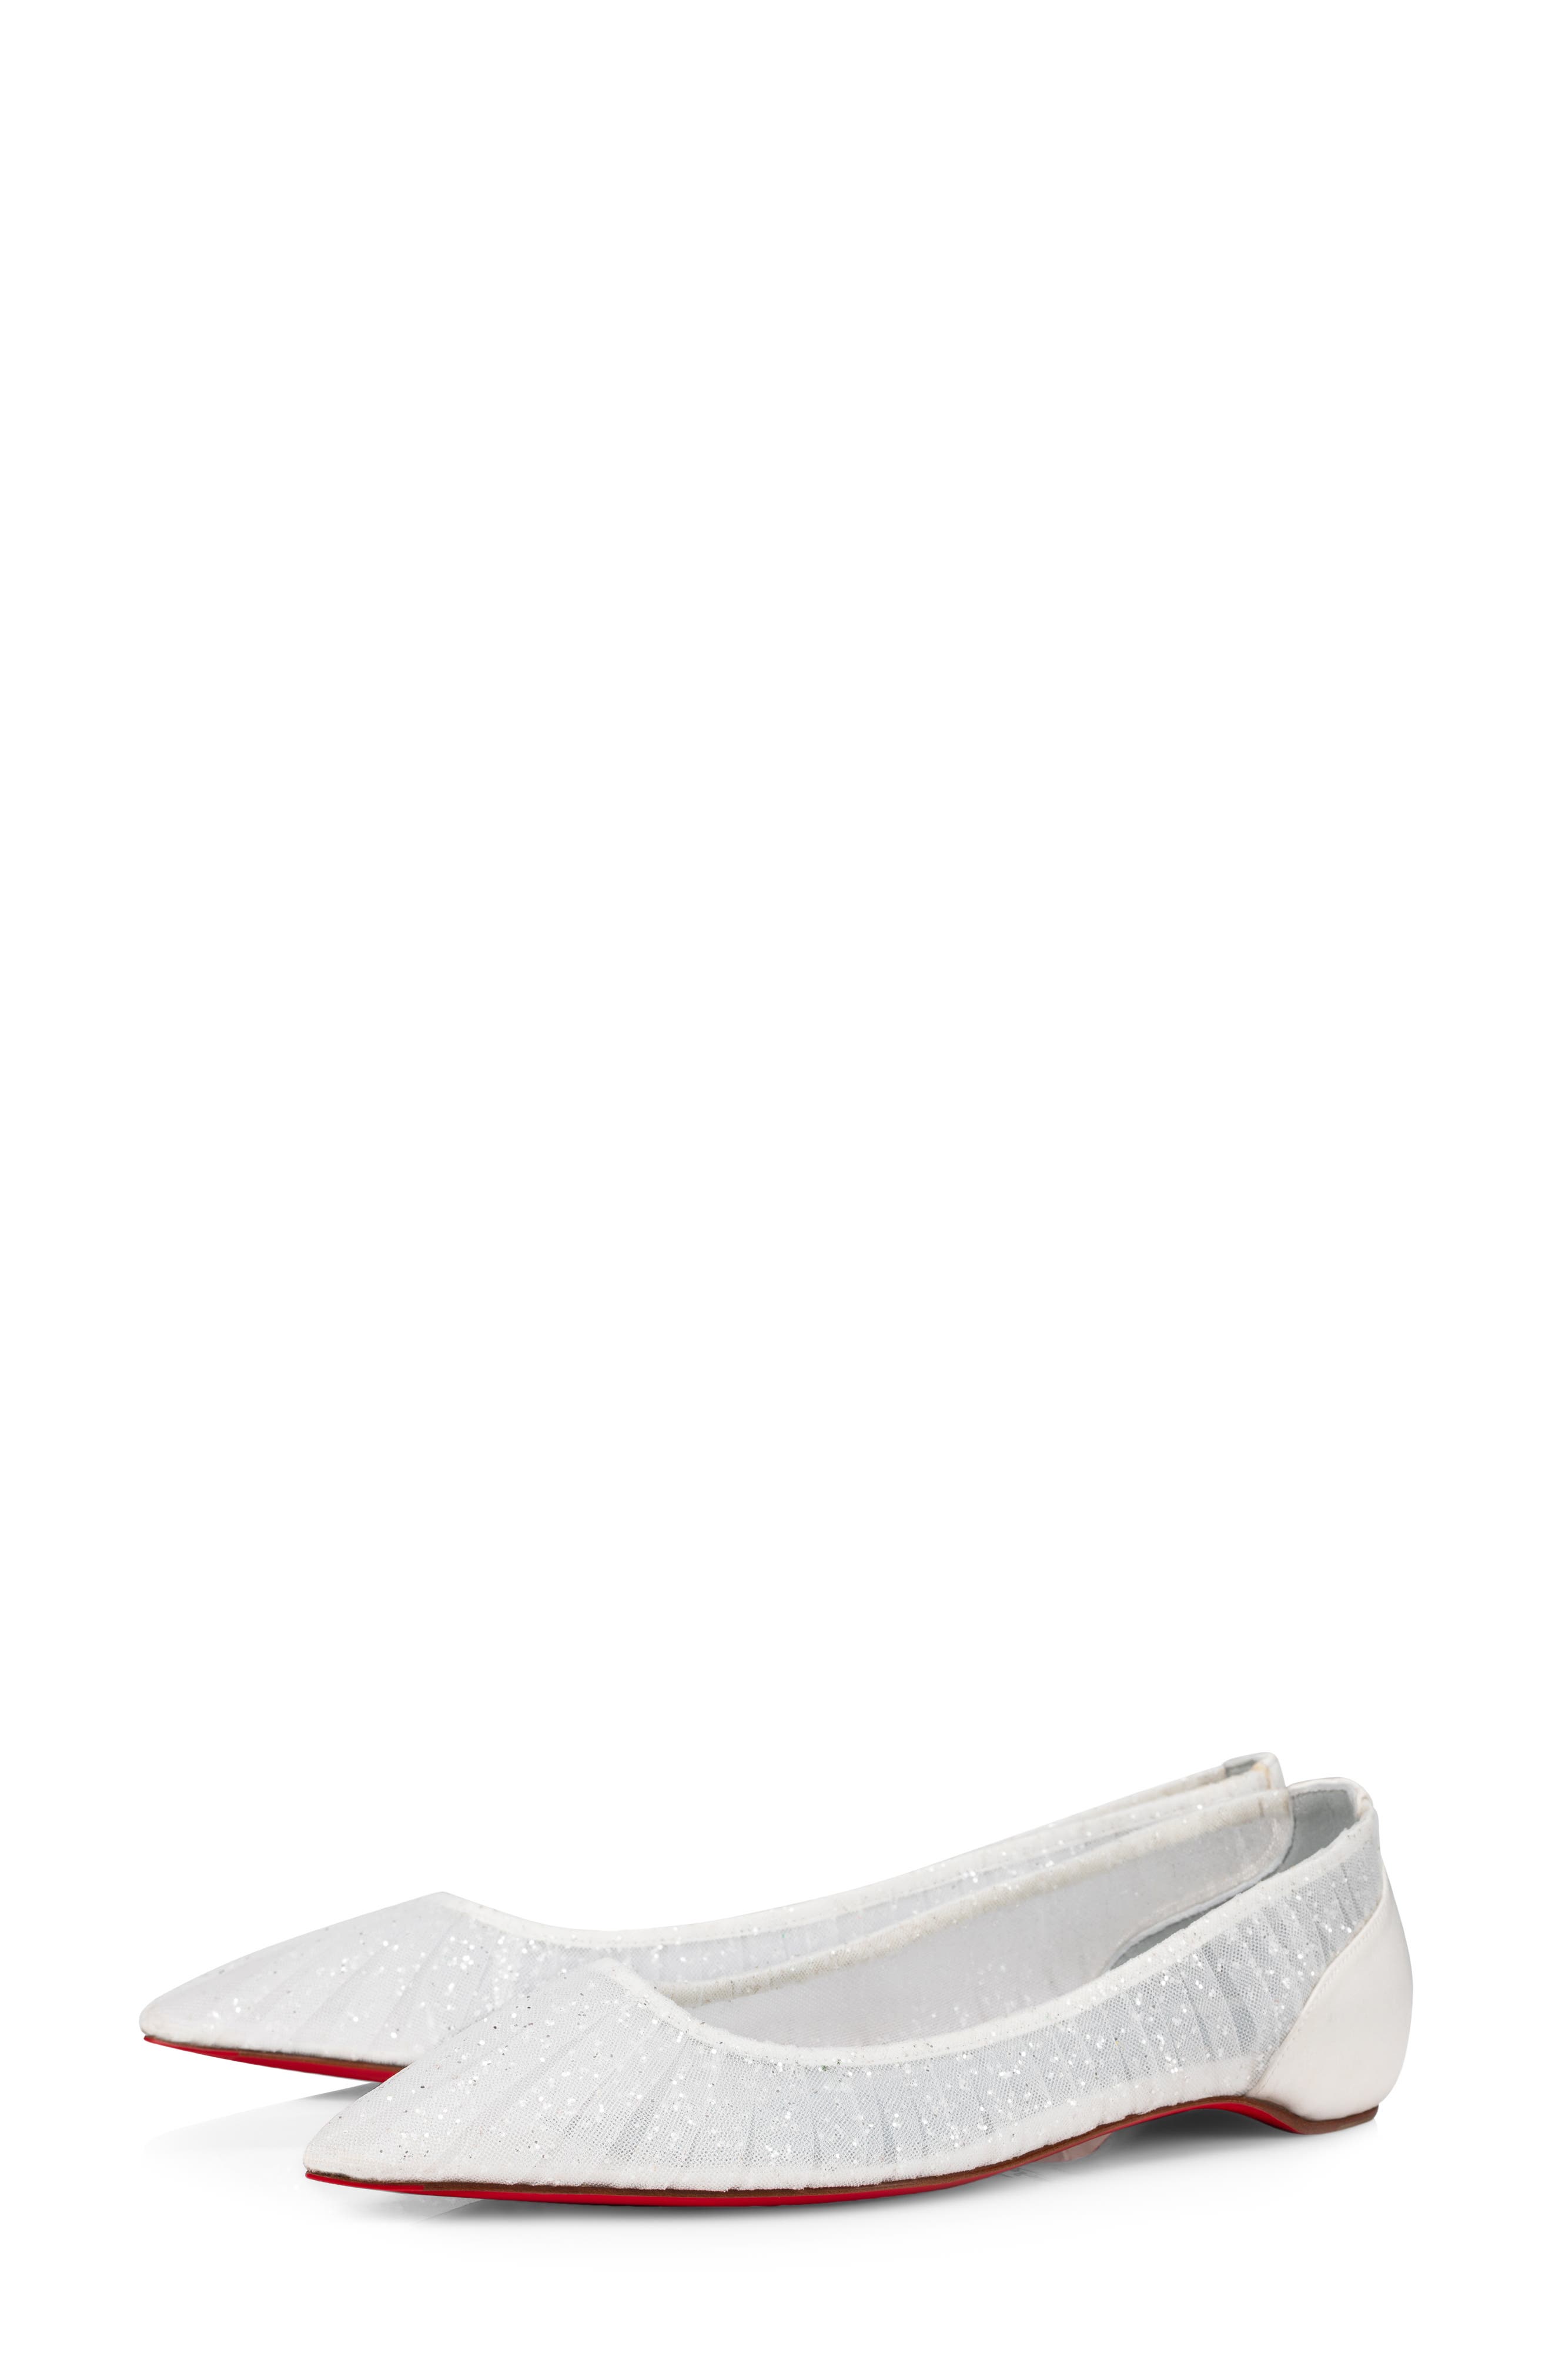 Christian Louboutin Kate Draperia Pointed Toe Flat in White/Silver/Blue at Nordstrom, Size 5Us